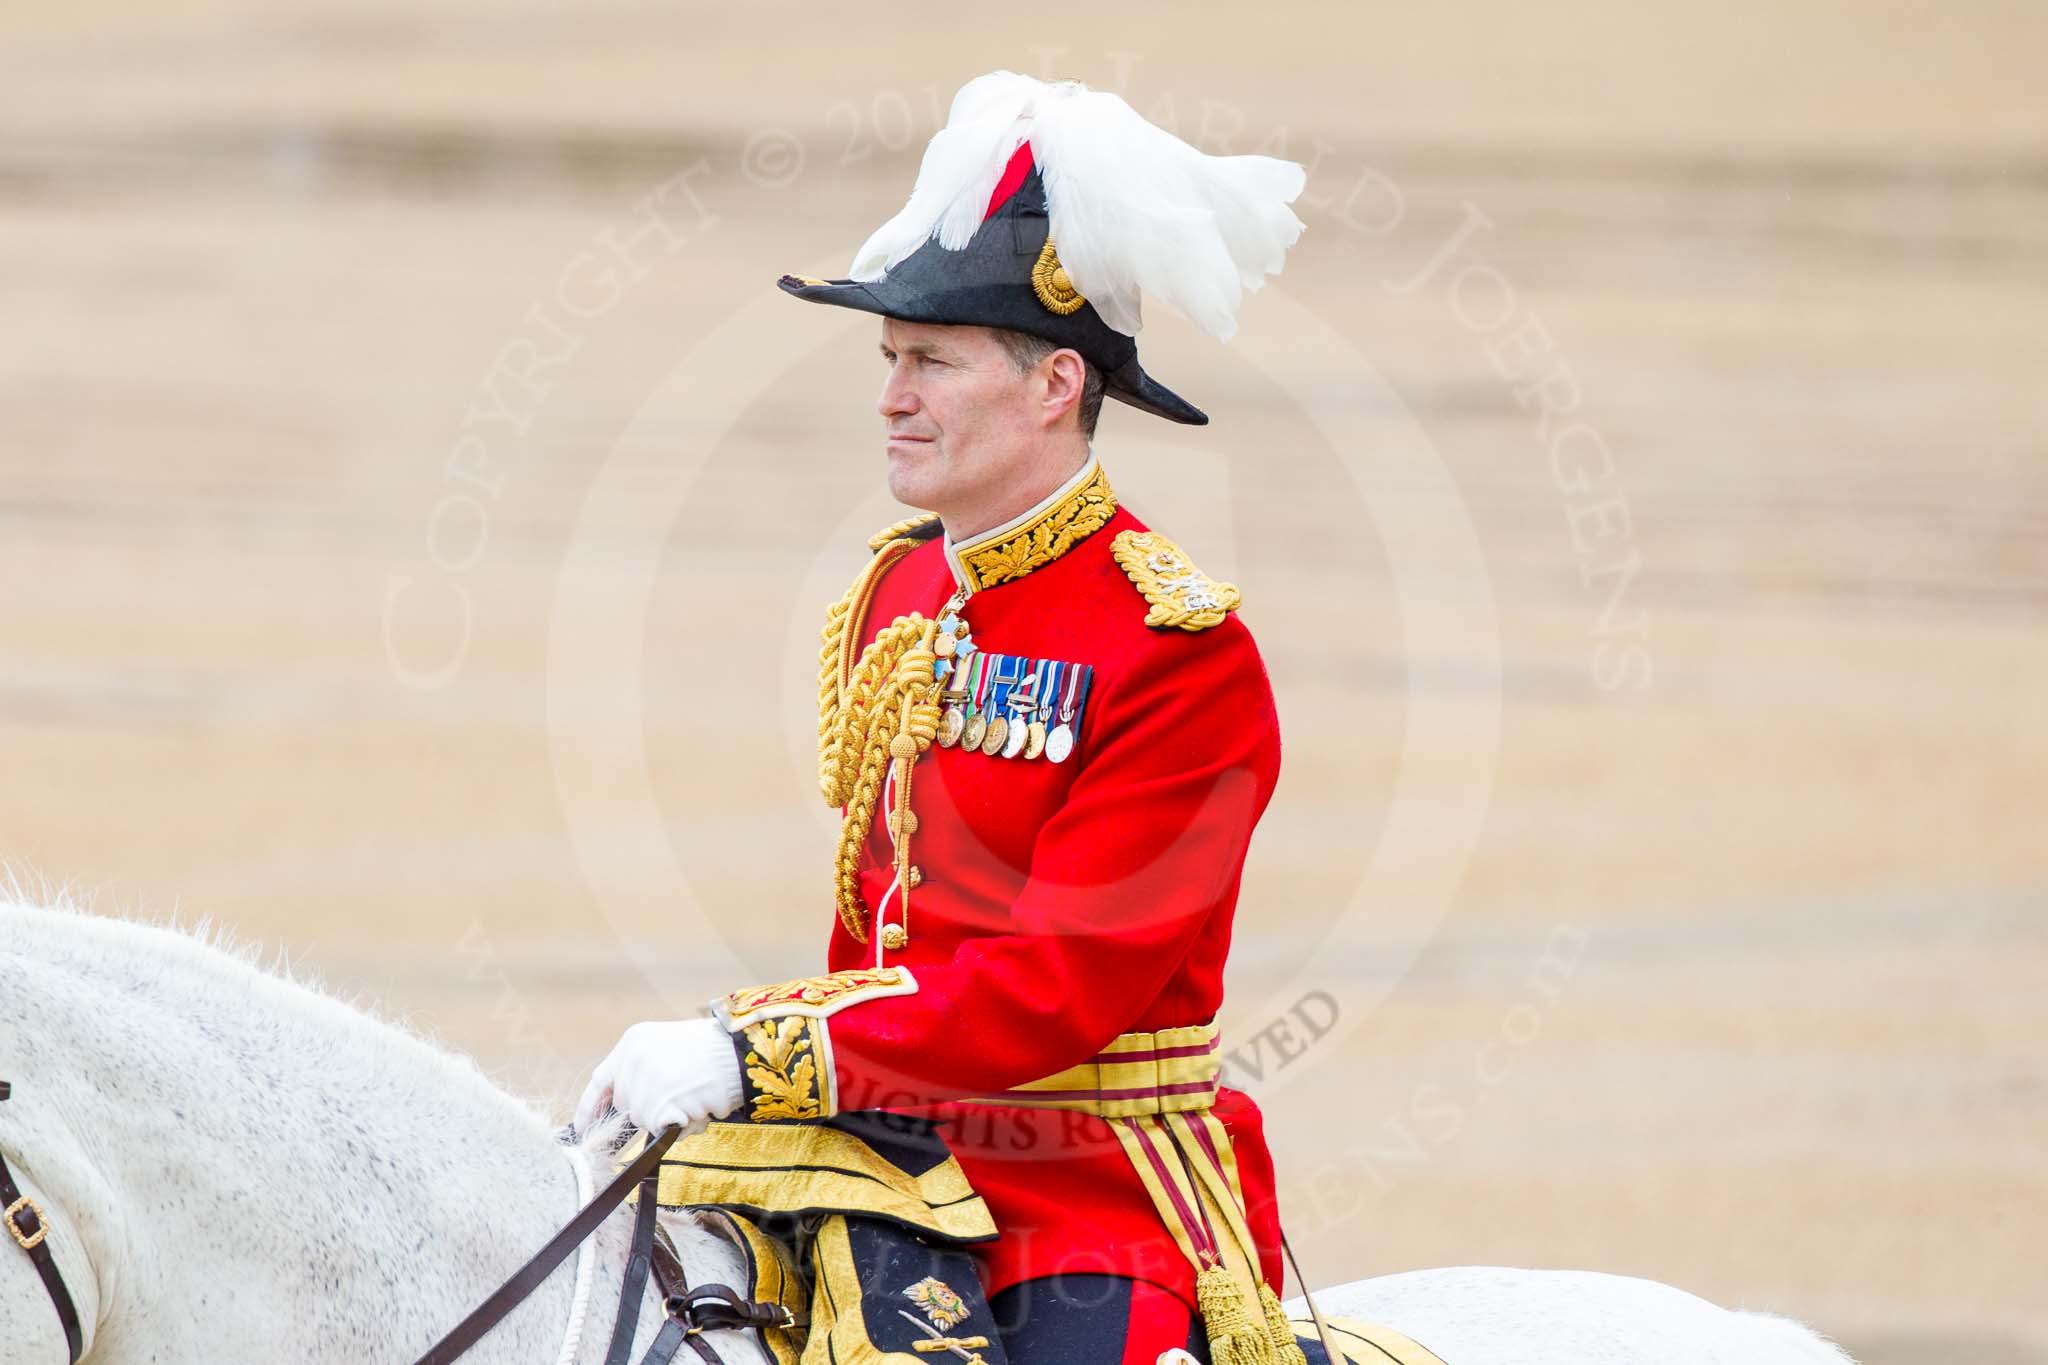 The Colonel's Review 2014.
Horse Guards Parade, Westminster,
London,

United Kingdom,
on 07 June 2014 at 11:01, image #277